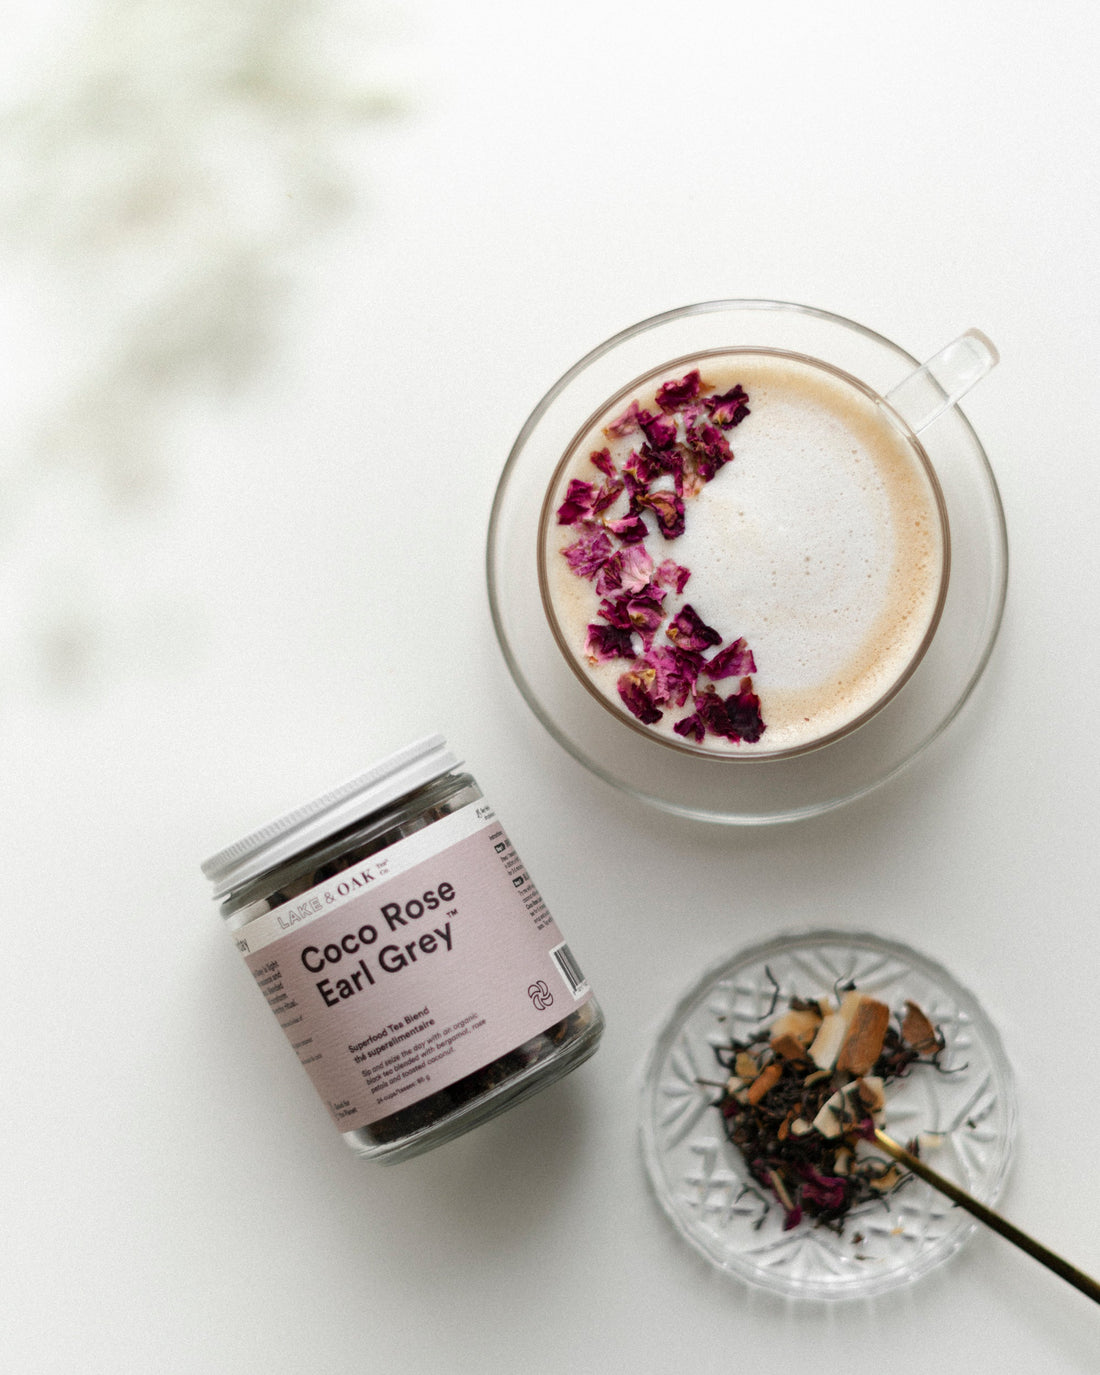 Coco Rose Early Grey - Superfood Tea